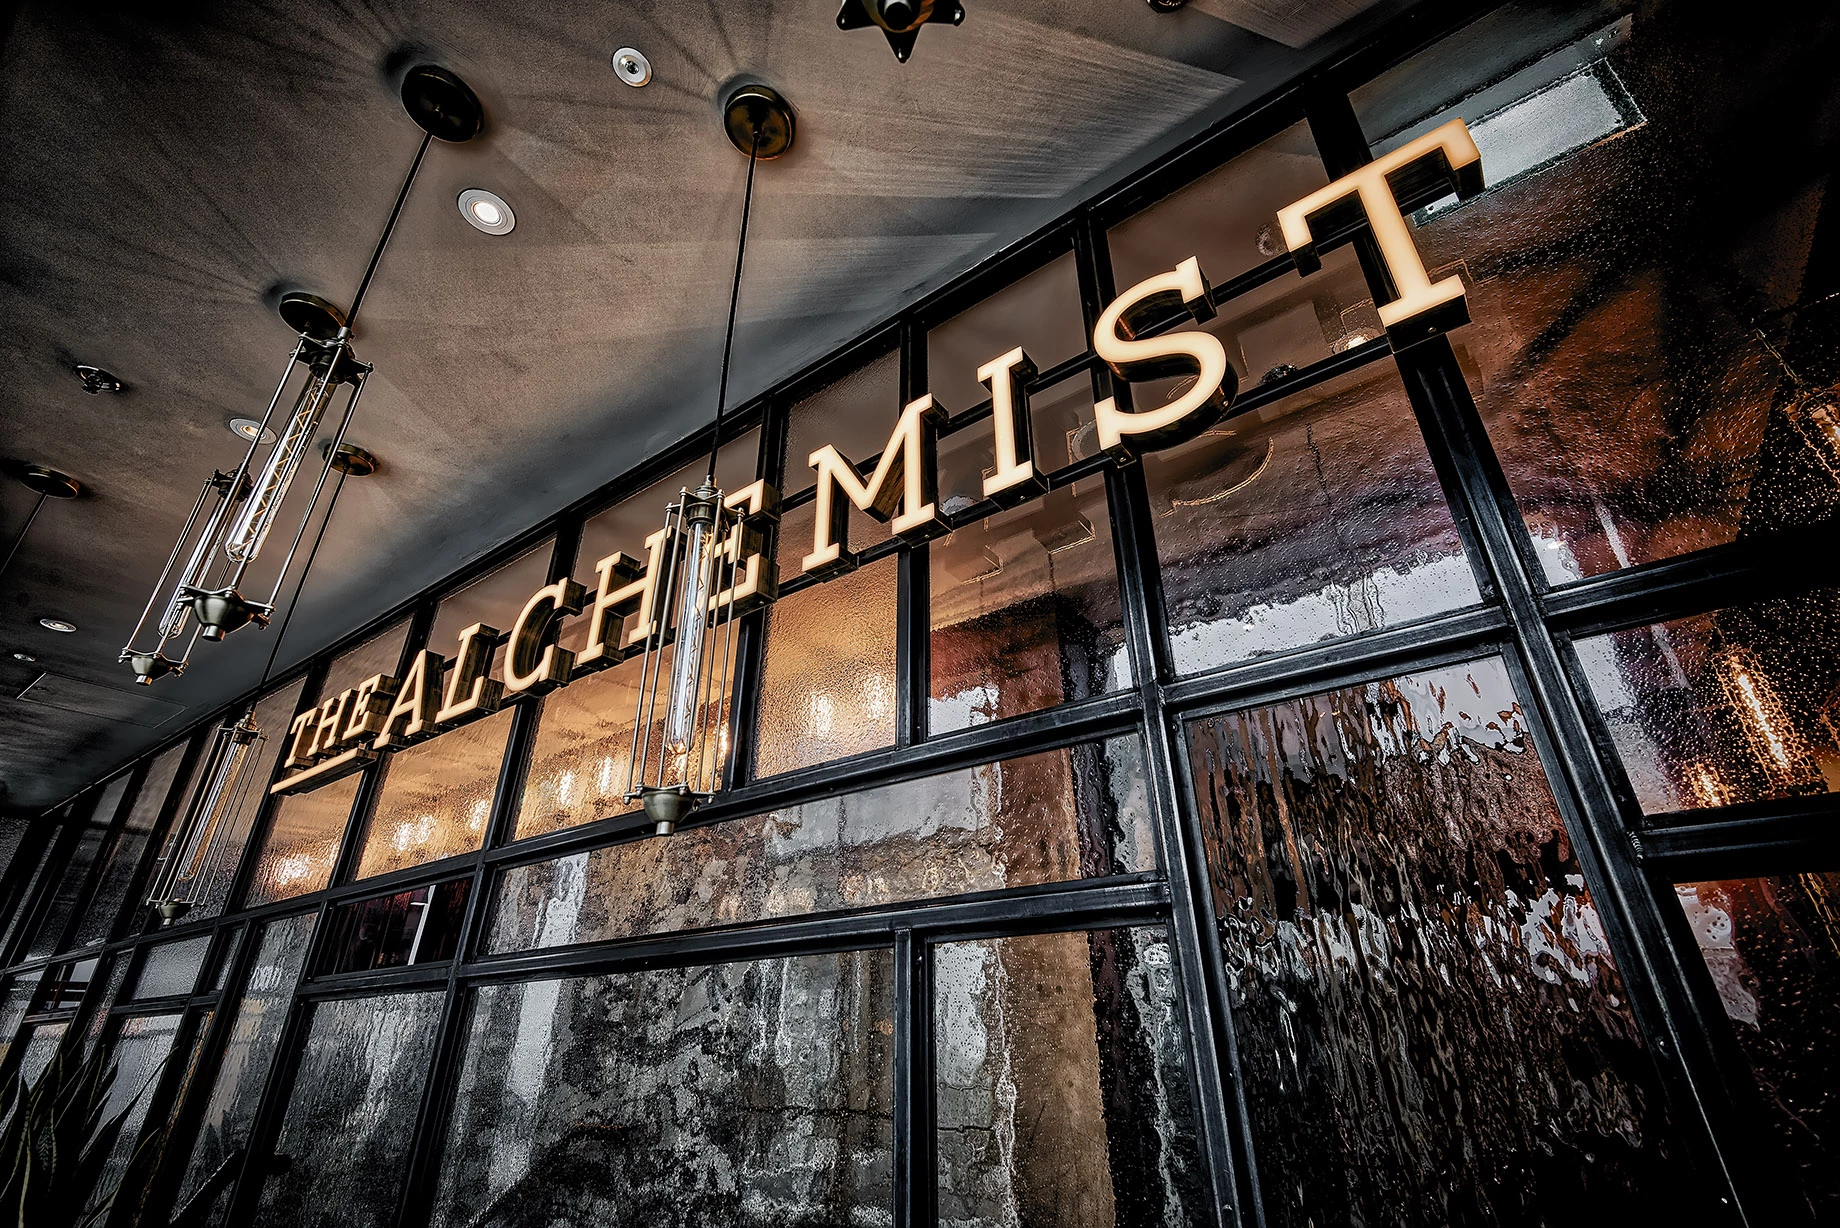 The Alchemist already has a venue in Bevis Marks